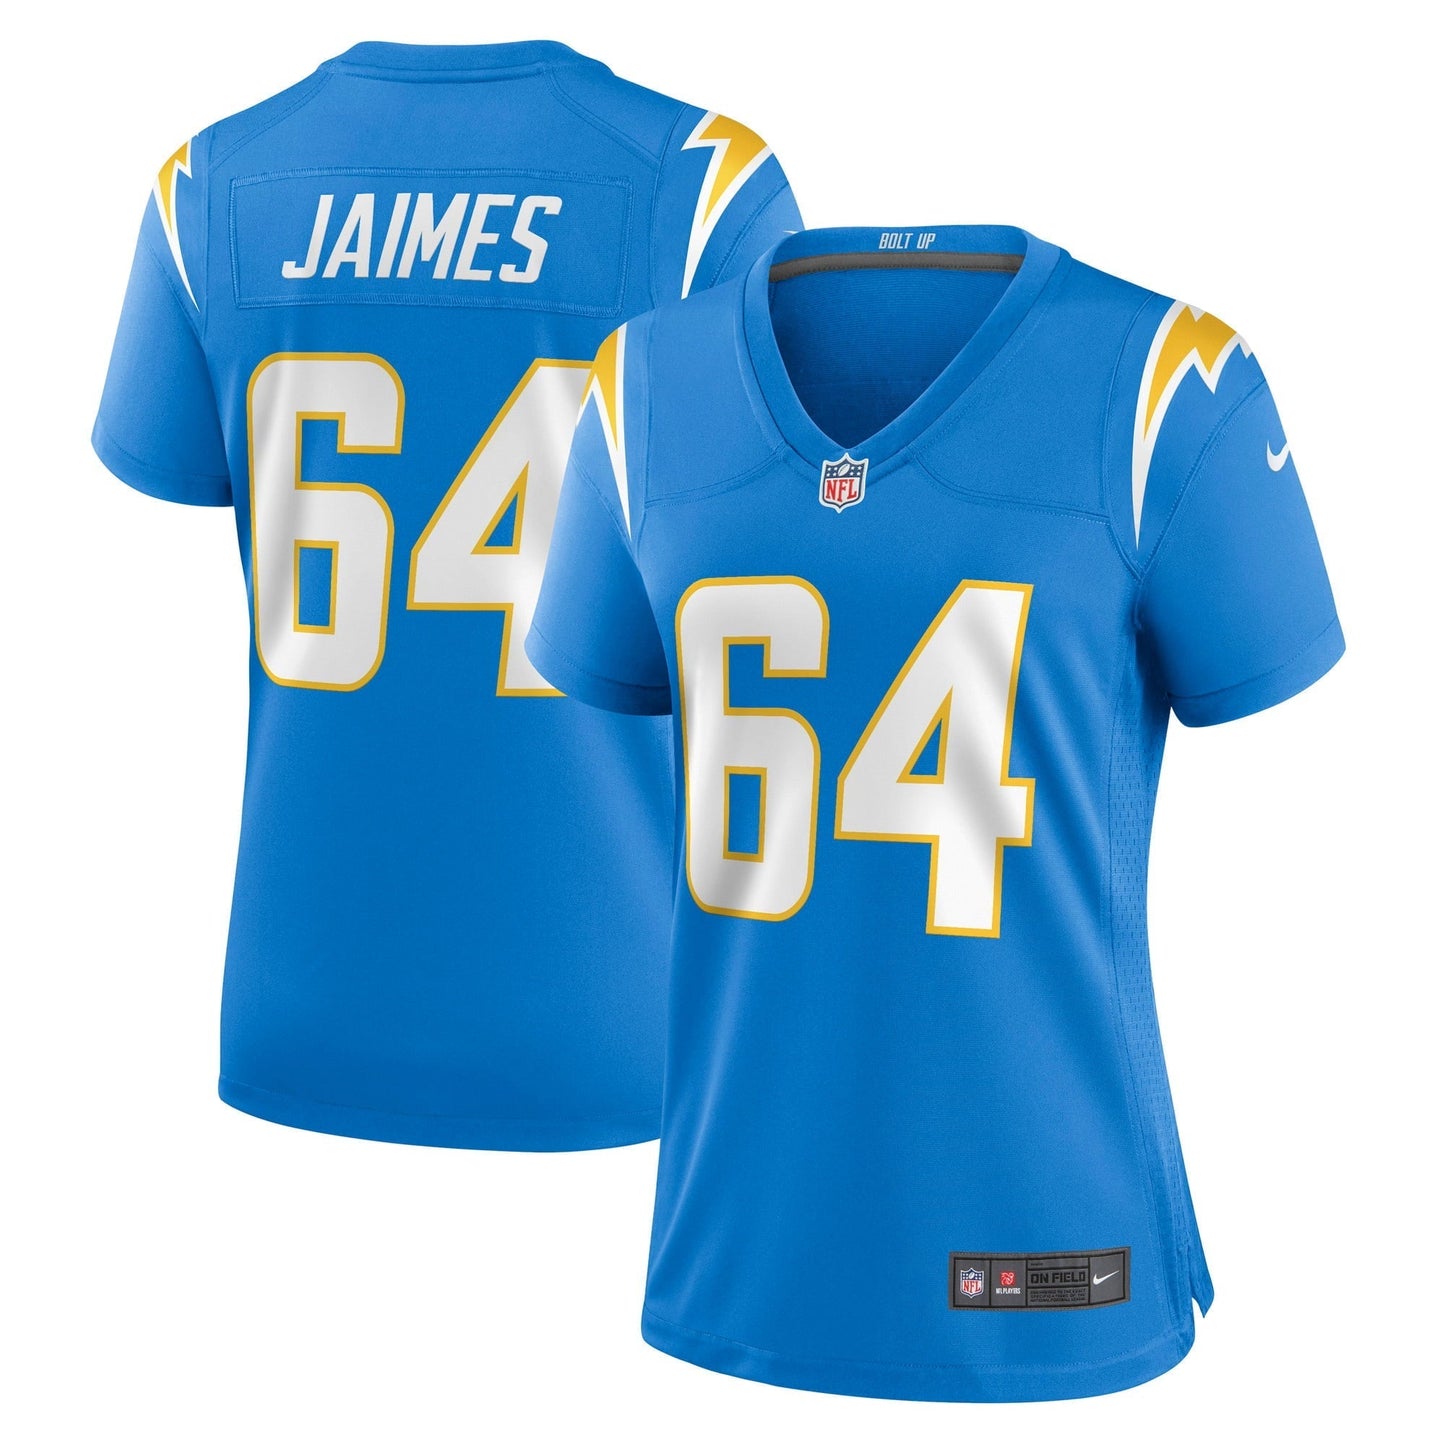 Women's Nike Brenden Jaimes Powder Blue Los Angeles Chargers Game Jersey